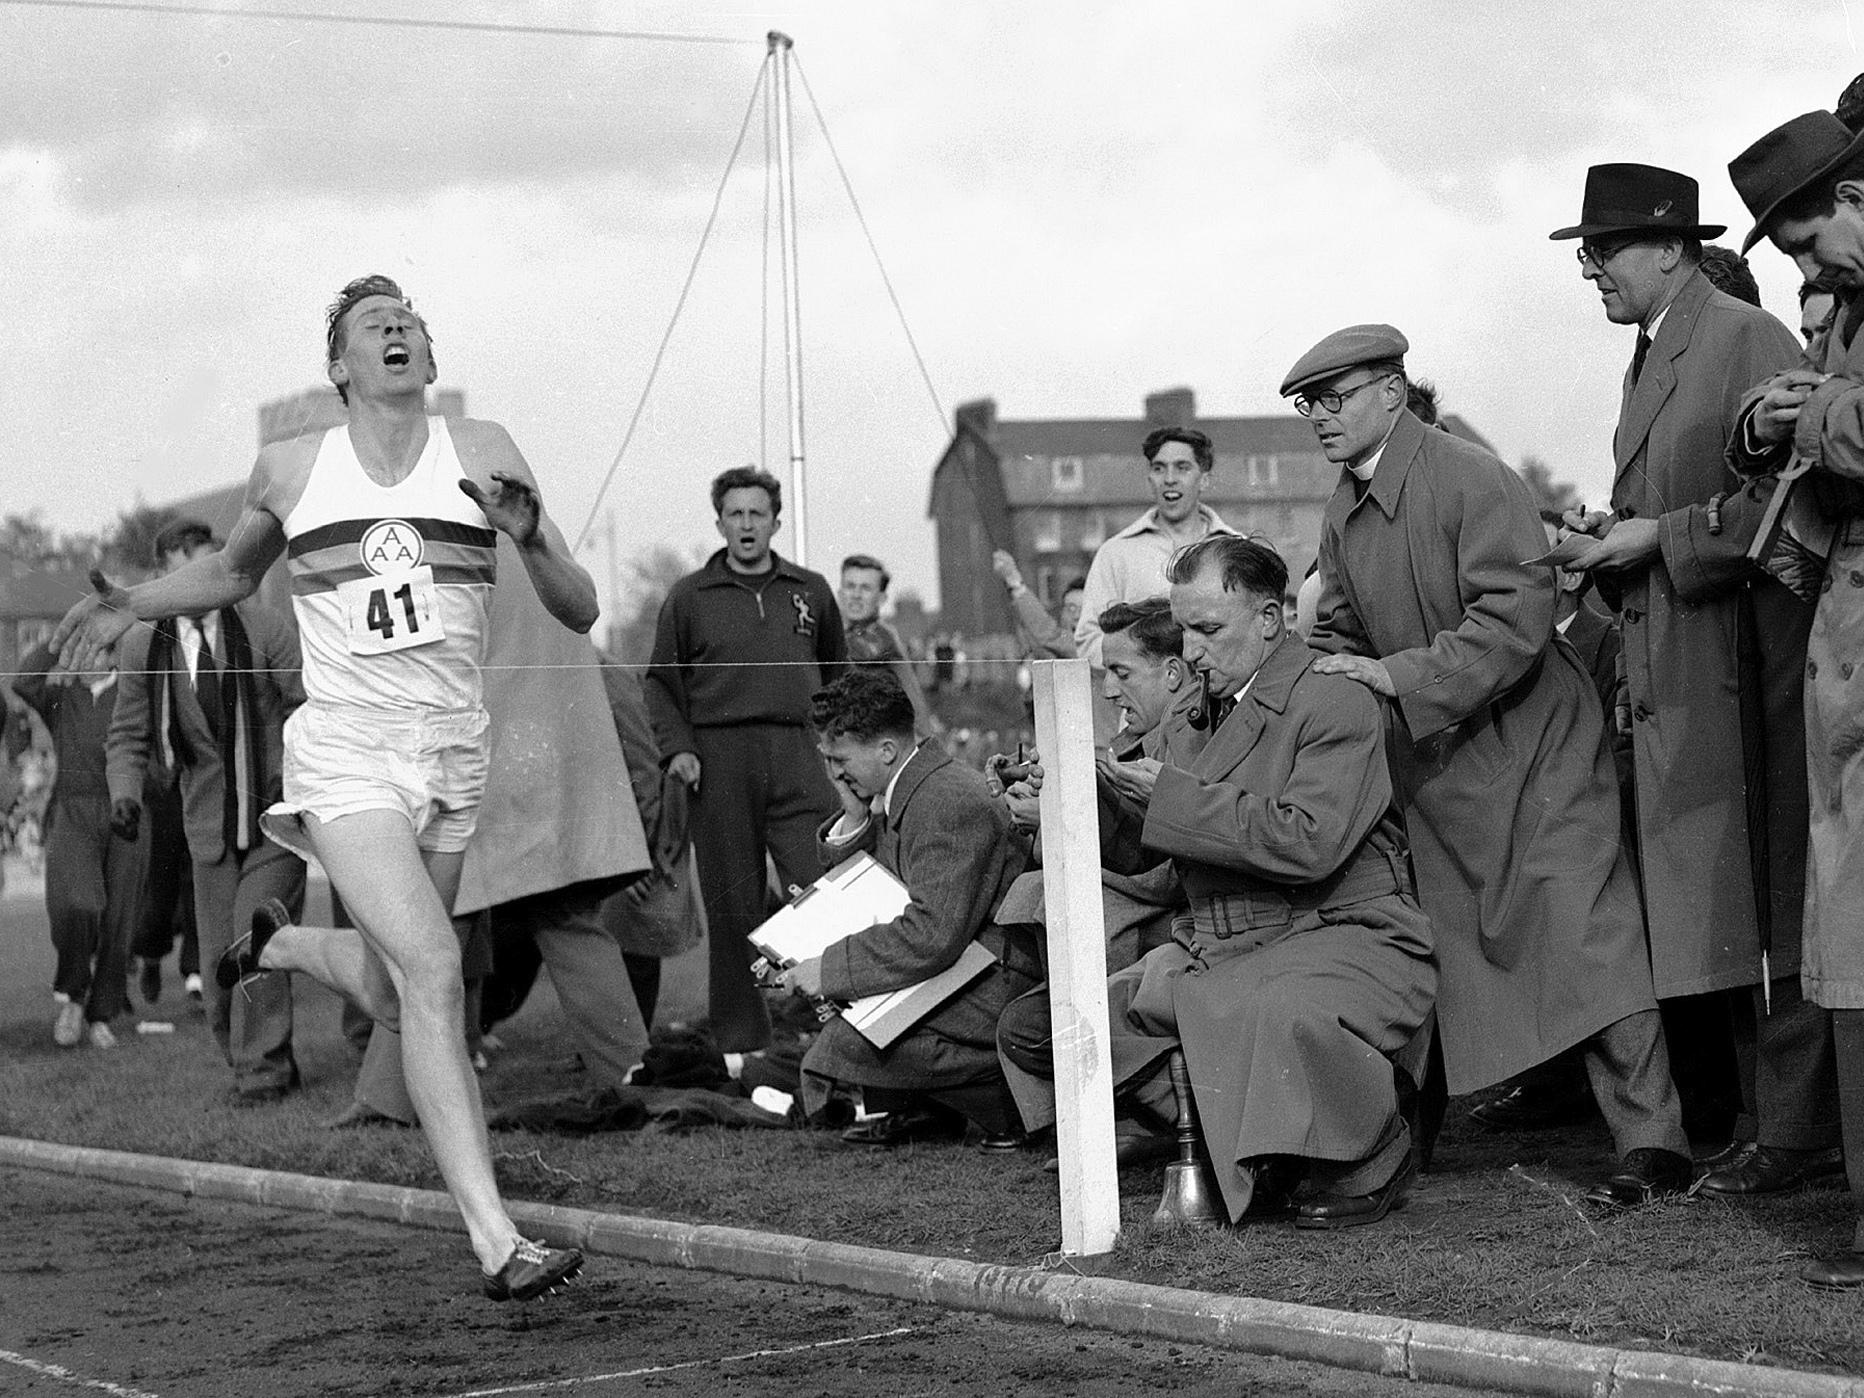 Roger Bannister breaking the four-minute mile